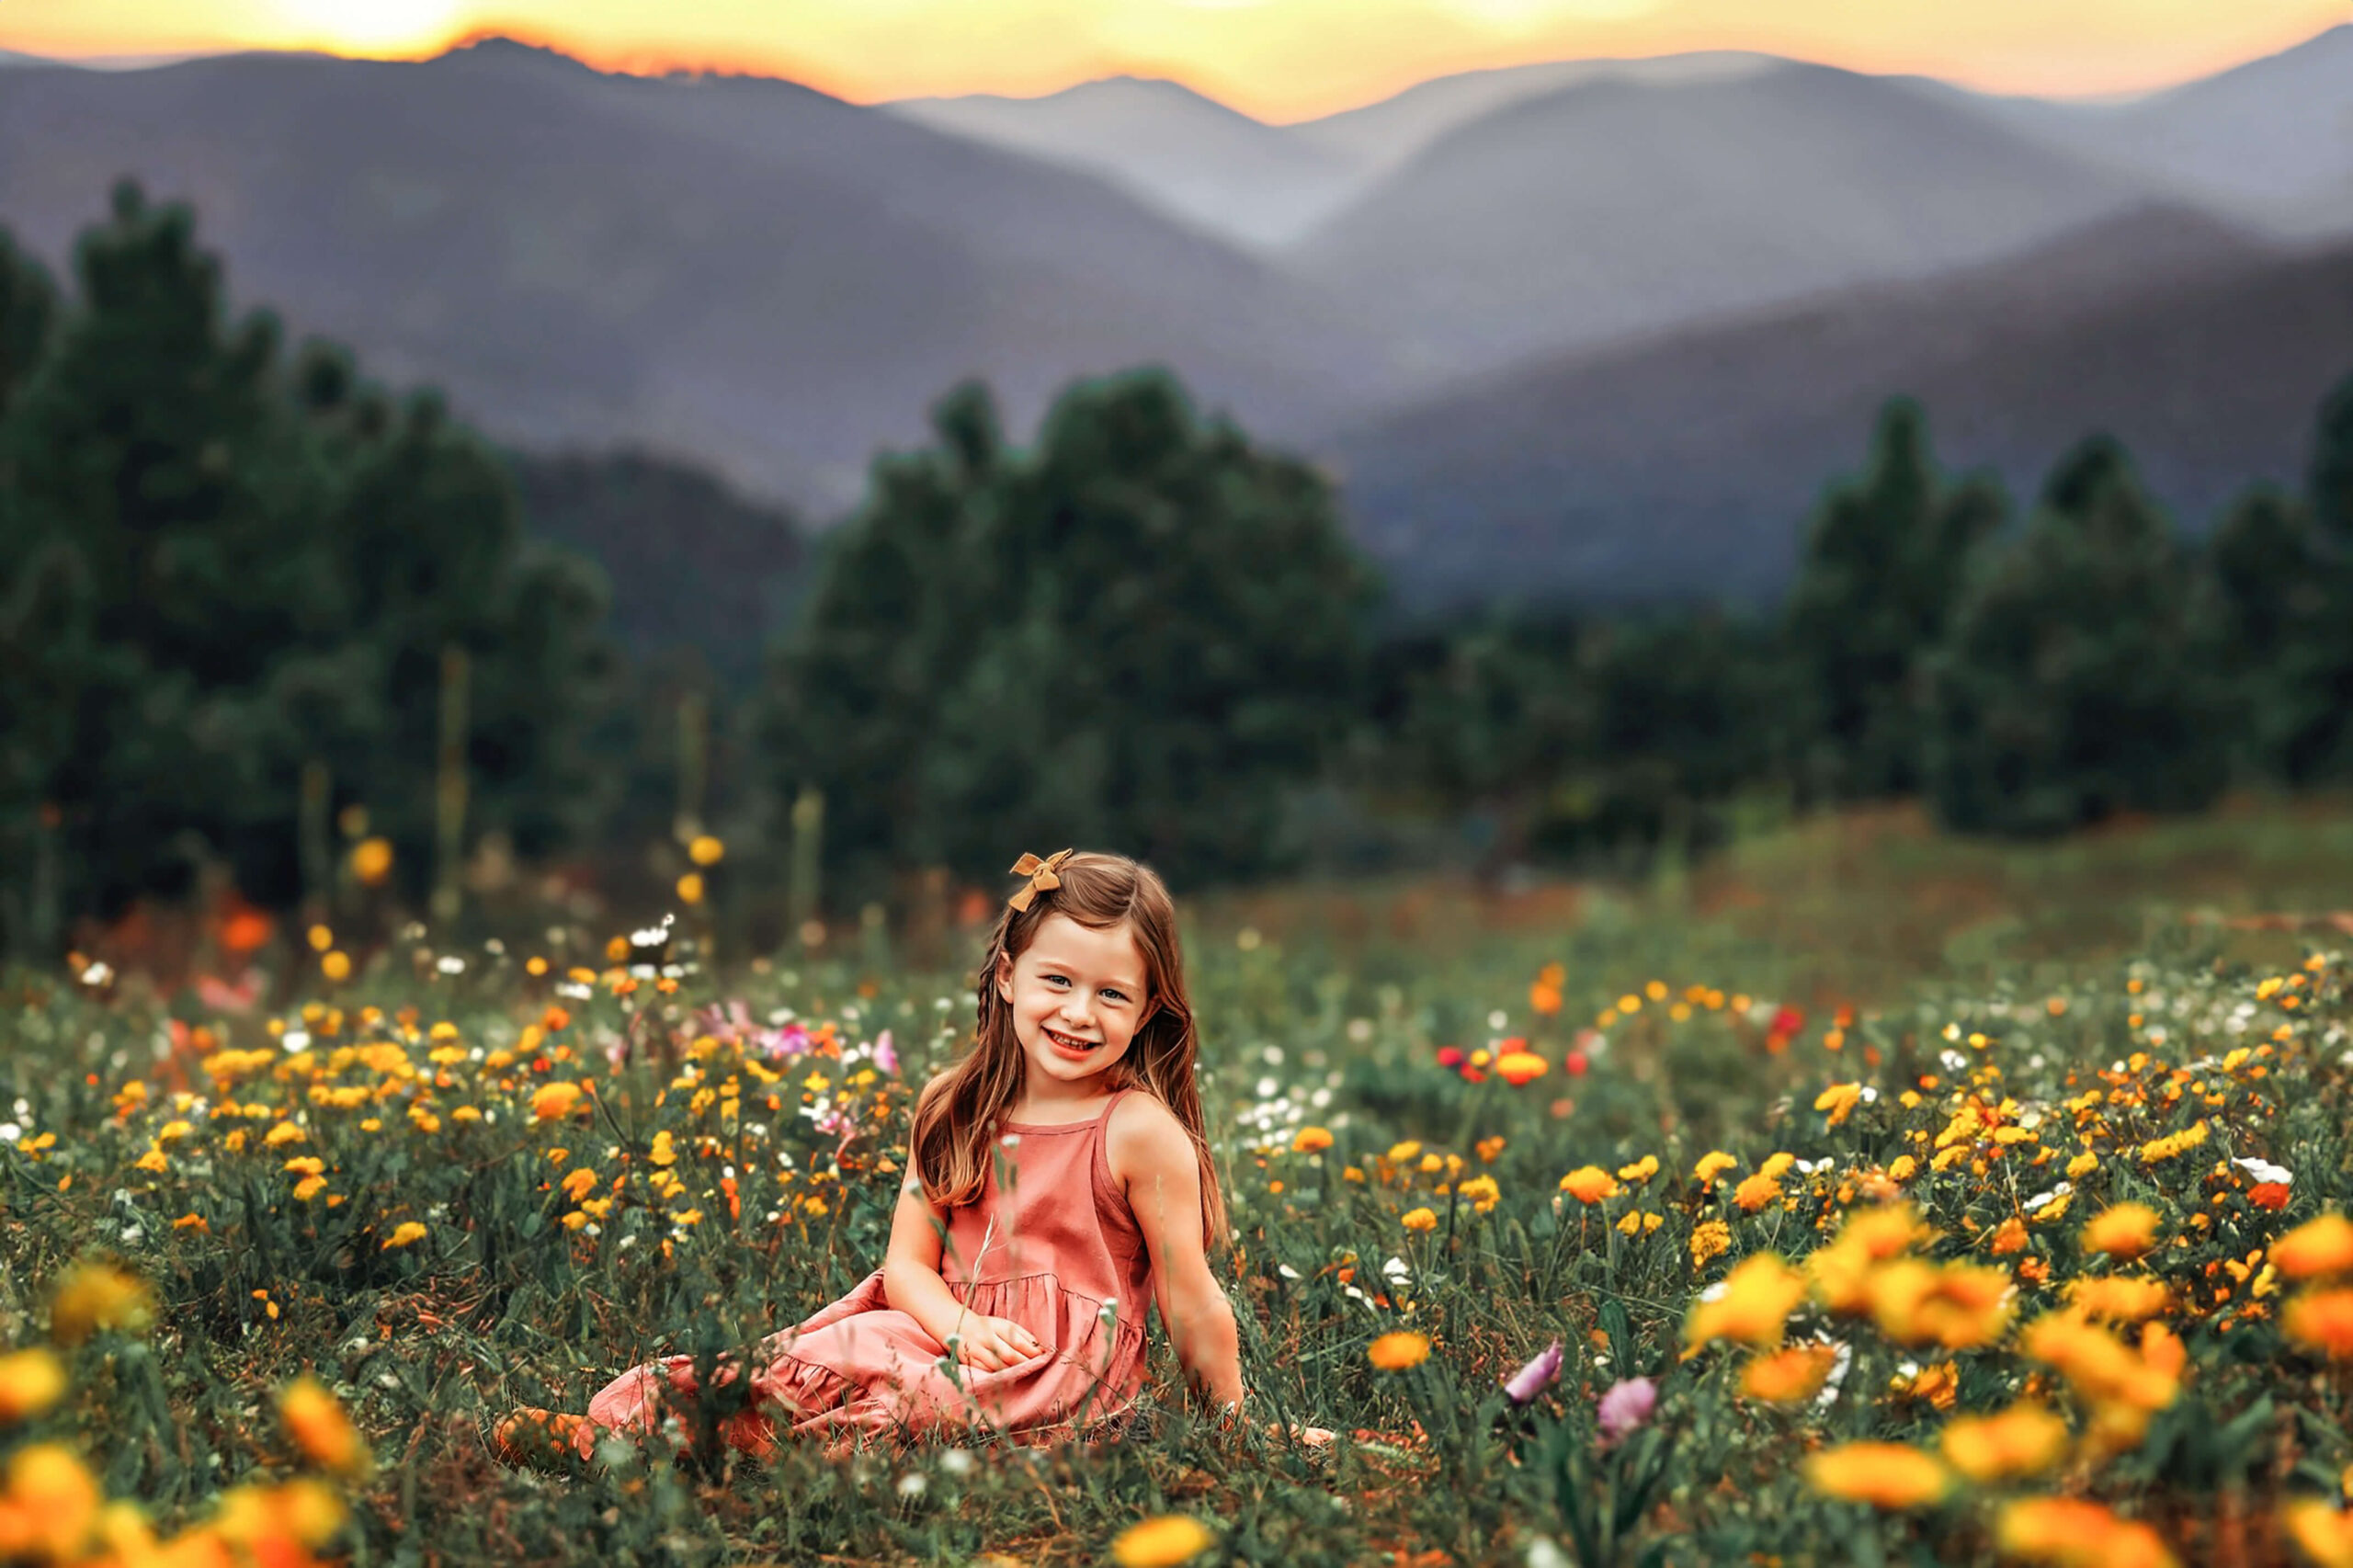 Young lady posing in peach colored dress amidst the yellow wild flowers at Mt. Falcon.